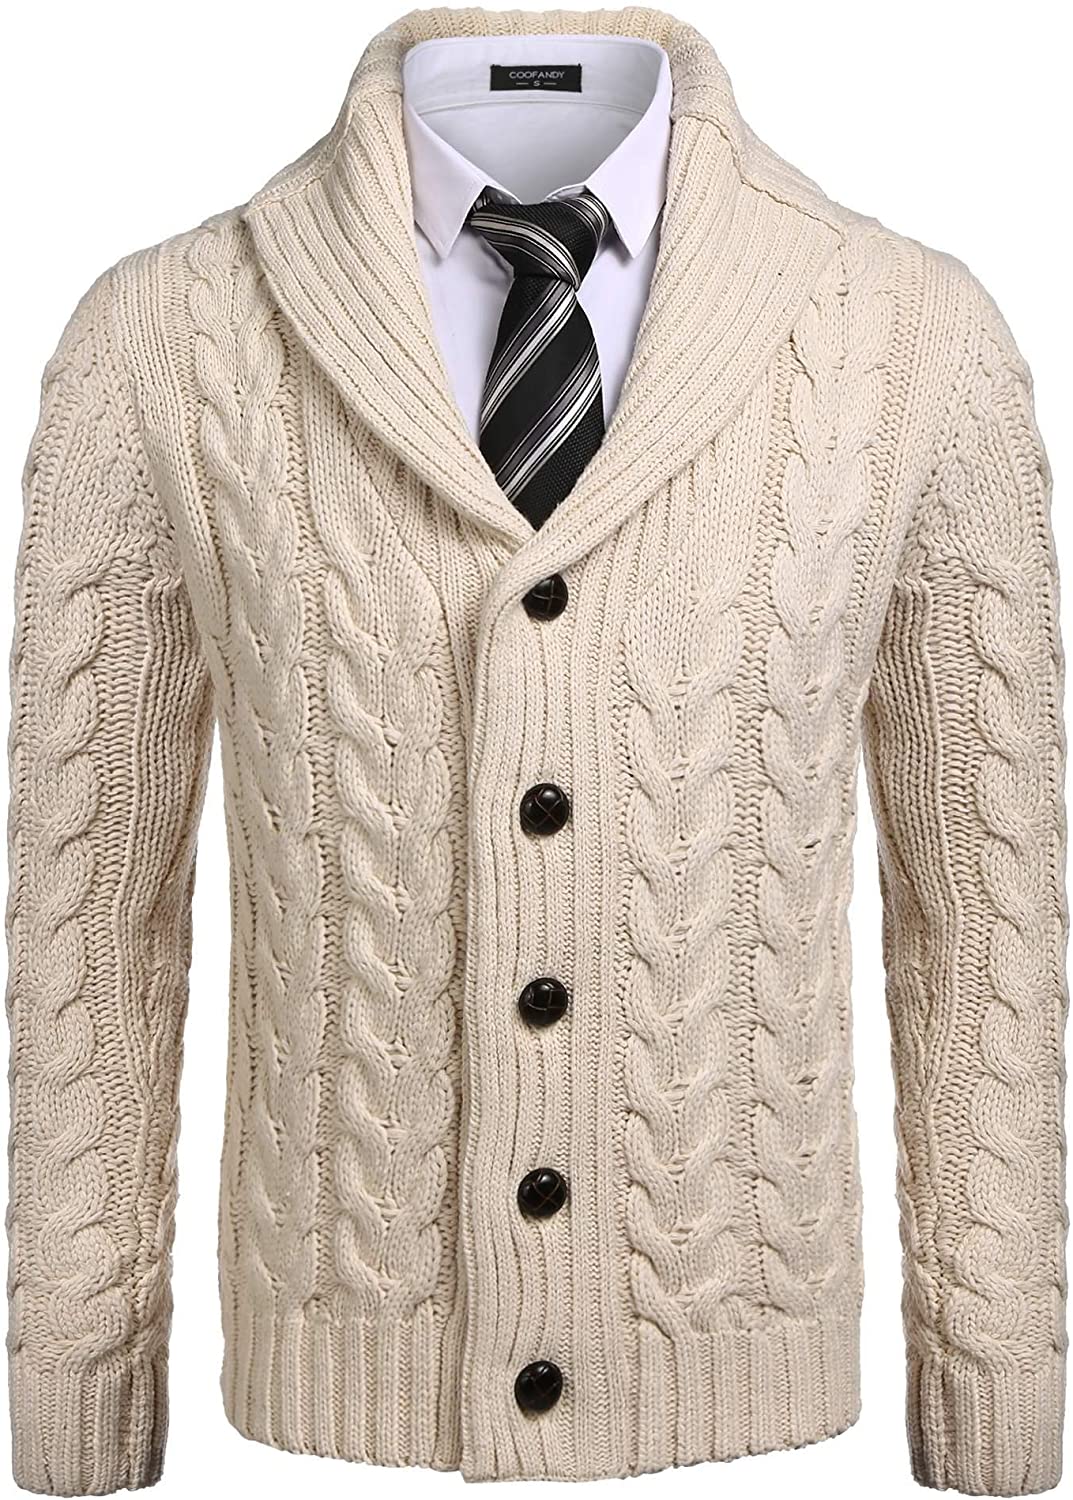 COOFANDY Men's Shawl Collar Cardigan Sweater Cable Knitted Button Down ...